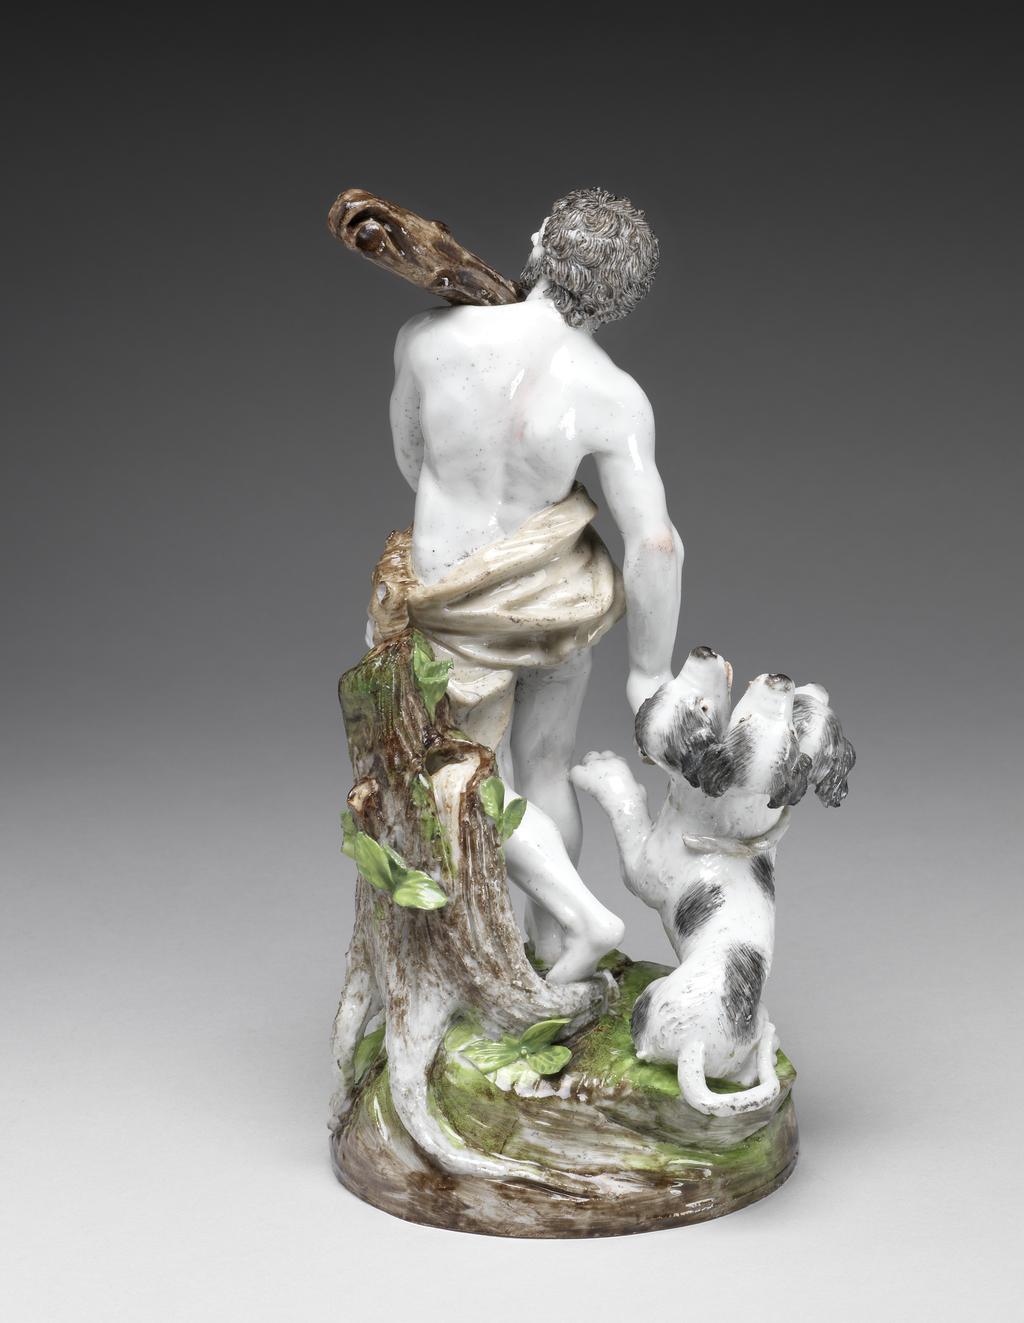 An image of Figure Group. Hercules and Cerberus. Le Nove Porcelain Factory, The Veneto, Le Nove. A brown lion skin and mask is draped around his hips. In his left hand he holds the lower end of a large dappled brown club which rests on his left shoulder. He holds a knotted rope in his right hand which is extended downwards. Cerberus, in the form of a friendly-looking black and white dog with three open-mouthed heads, is seated beside him. His left front paw is raised towards Hercules, and his tail is curled round and extends beyond the edge of the base. On his neck there is the remains of a rope which originally joined up with the knot held in Hercules’s hand. Hard-paste porcelain, press moulded and glazed, painted in polychrome enamels, height, whole, 21.9 cm, width, whole, 11.8 cm, width, base, 10.5 cm, circa 1785-1795. Antonibon-Parolin period.